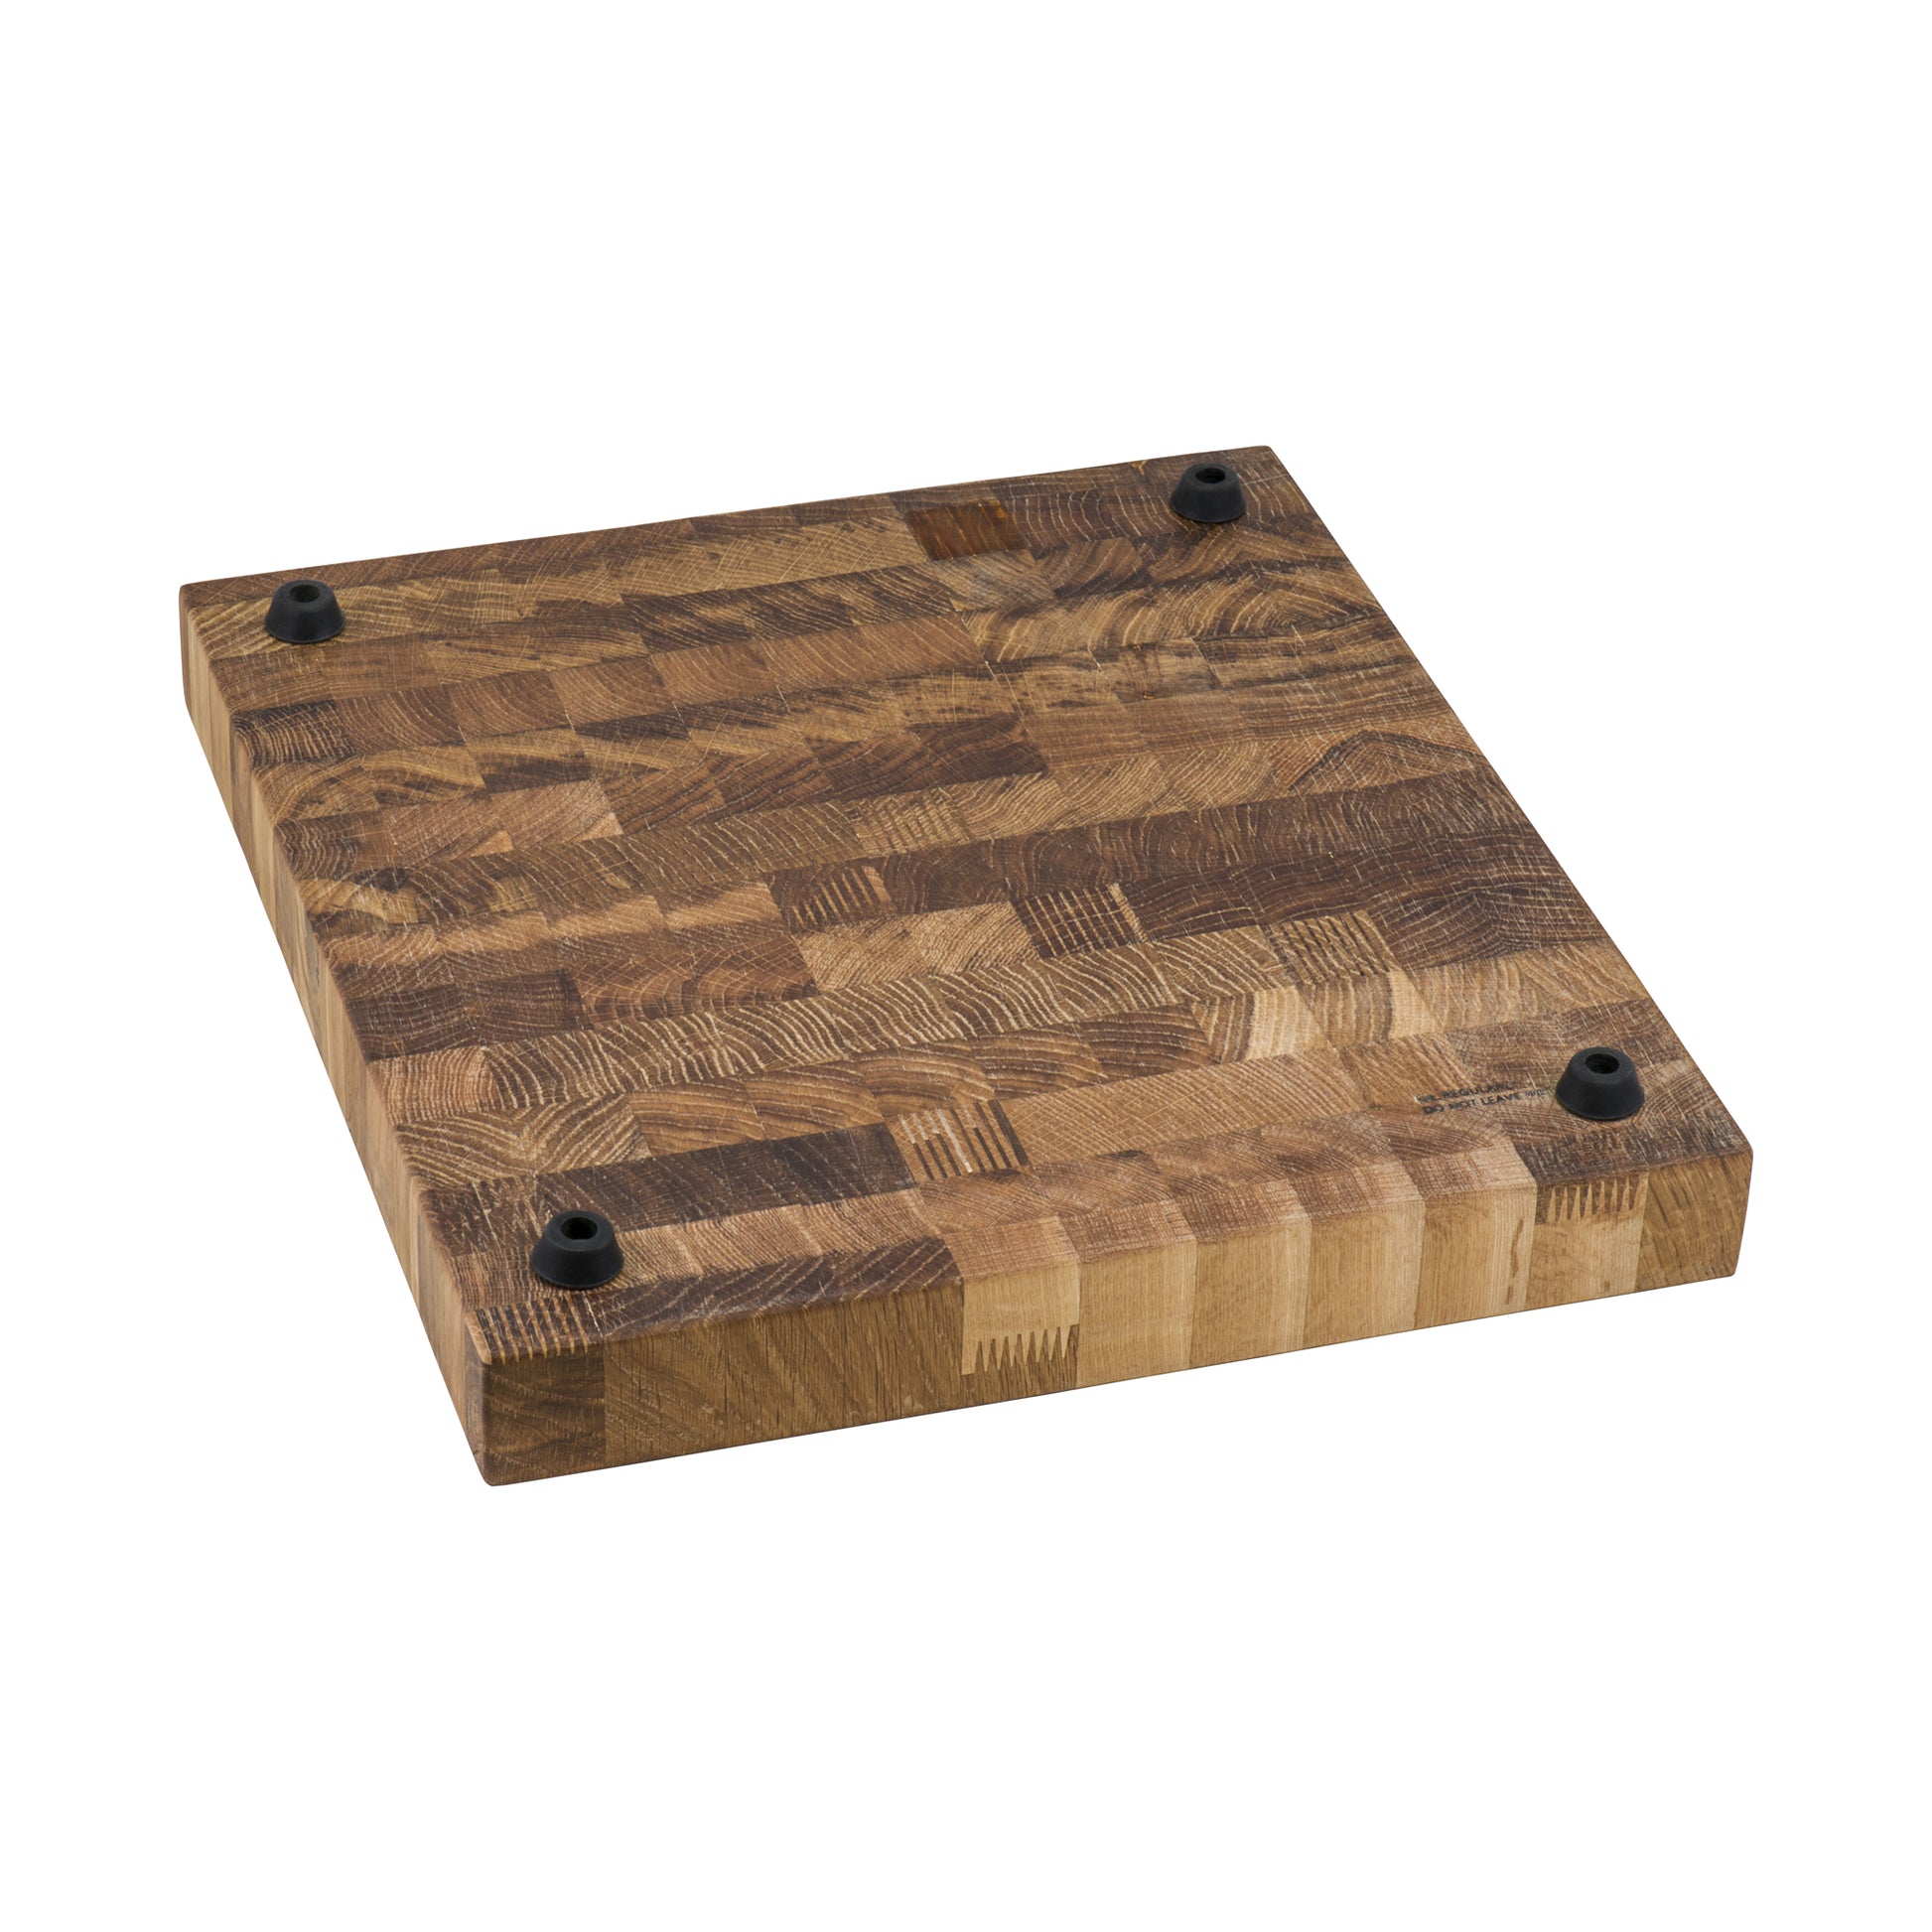 Large Butcher Block Cutting Board With Rubber Feet, Thick Cutting